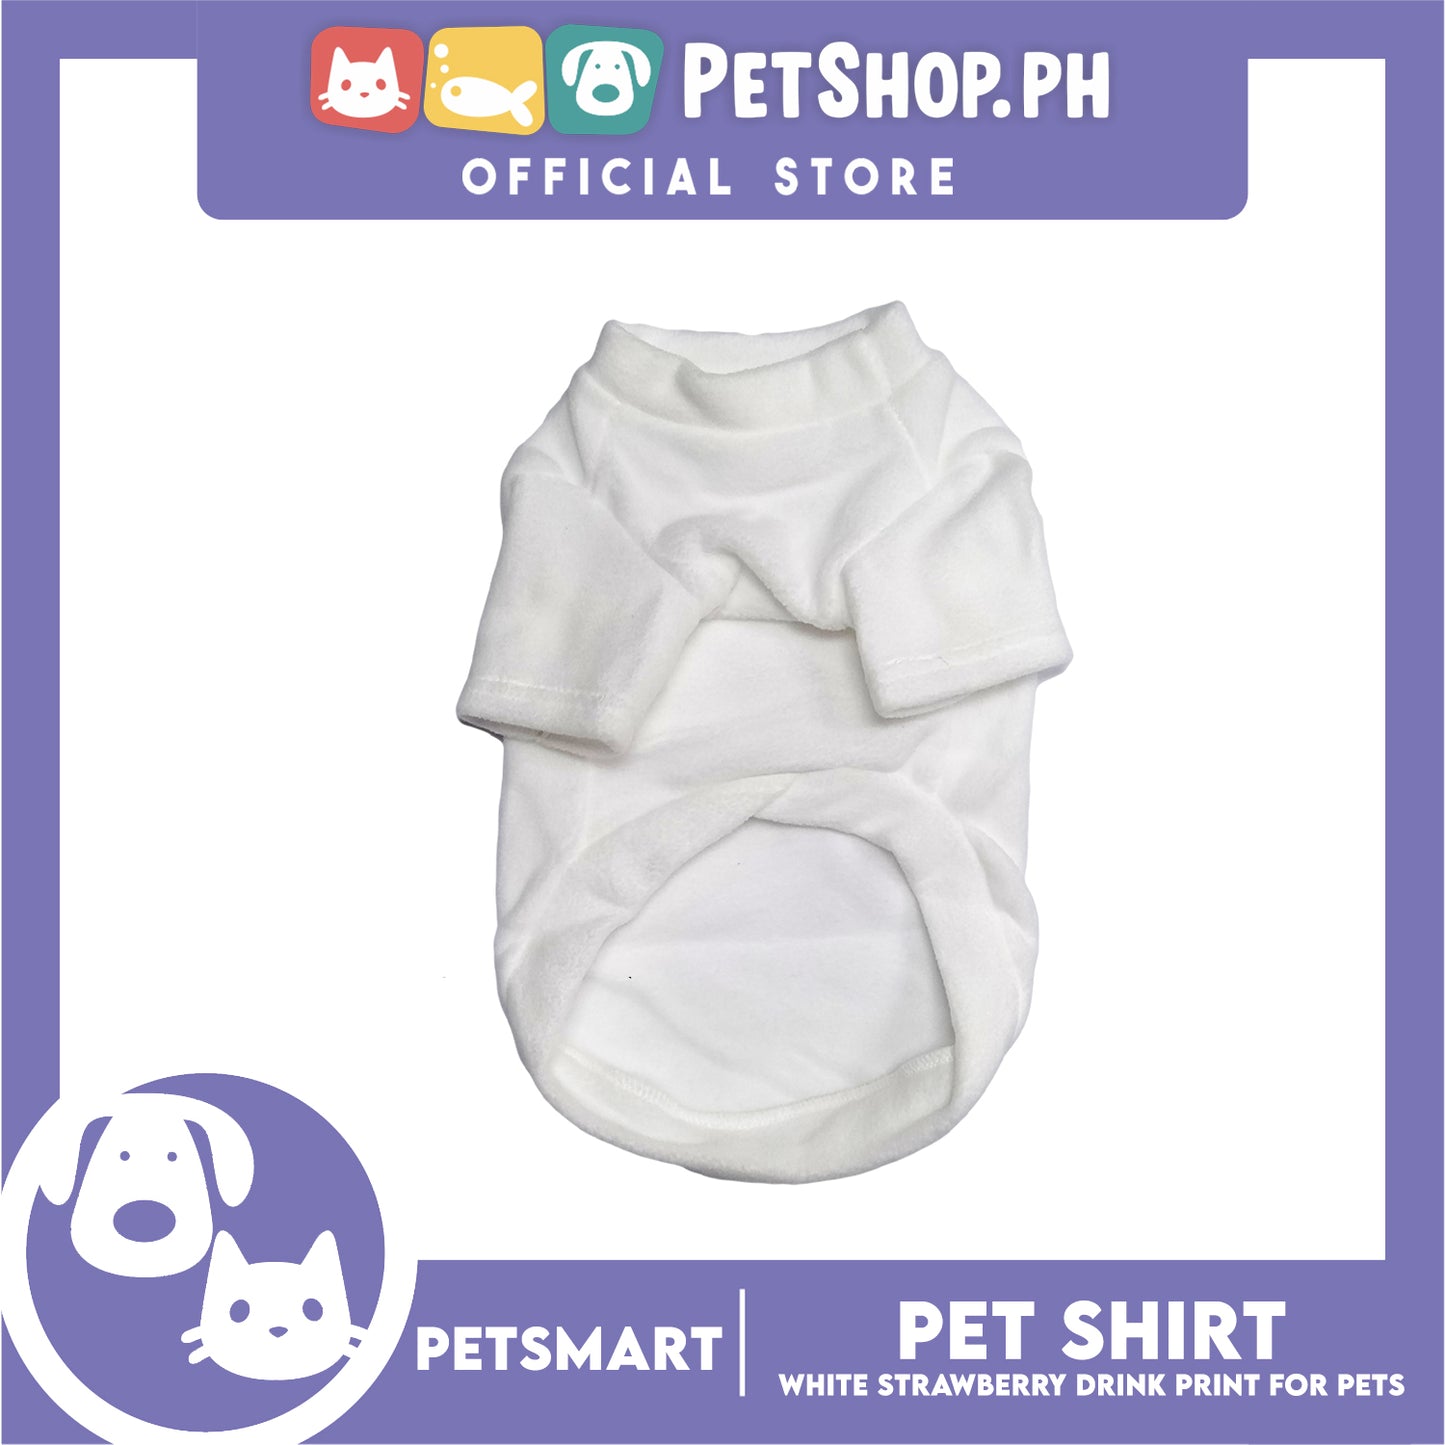 Pet Shirt White Strawberry Drink Design (Large) for Cats and Dogs Pet Clothes